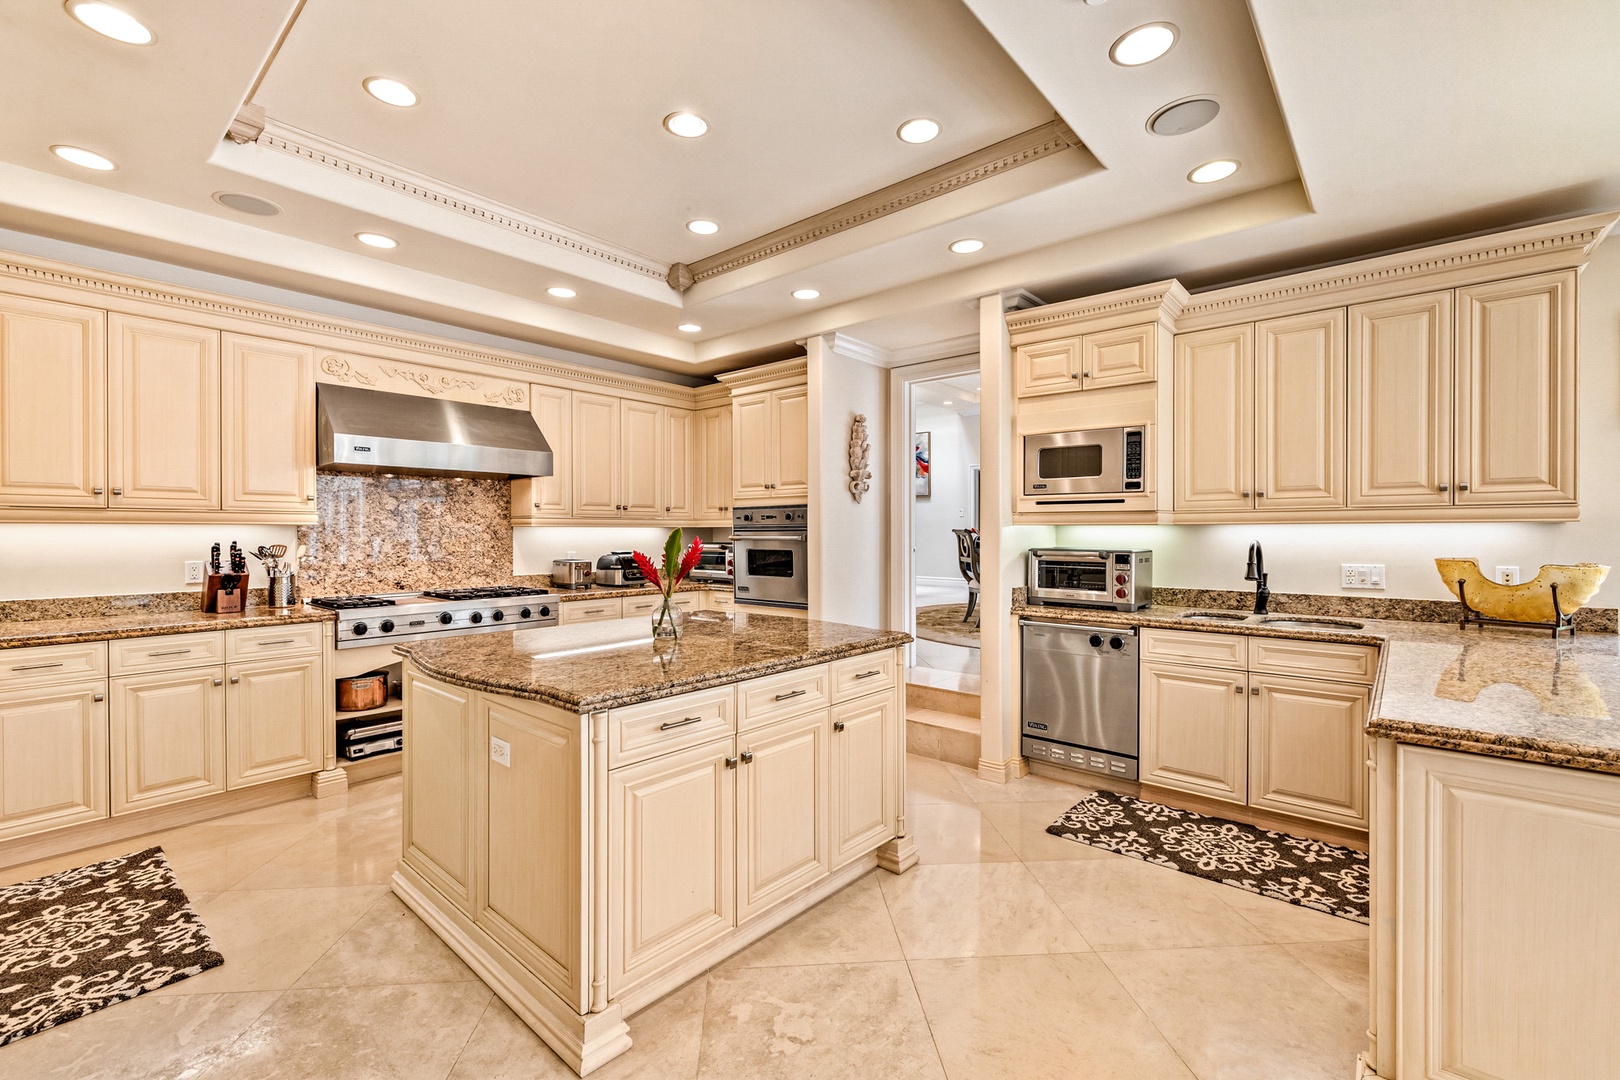 Honolulu Vacation Rentals, La Villa Kahala - Feel like a 5-star chef in this expansive kitchen